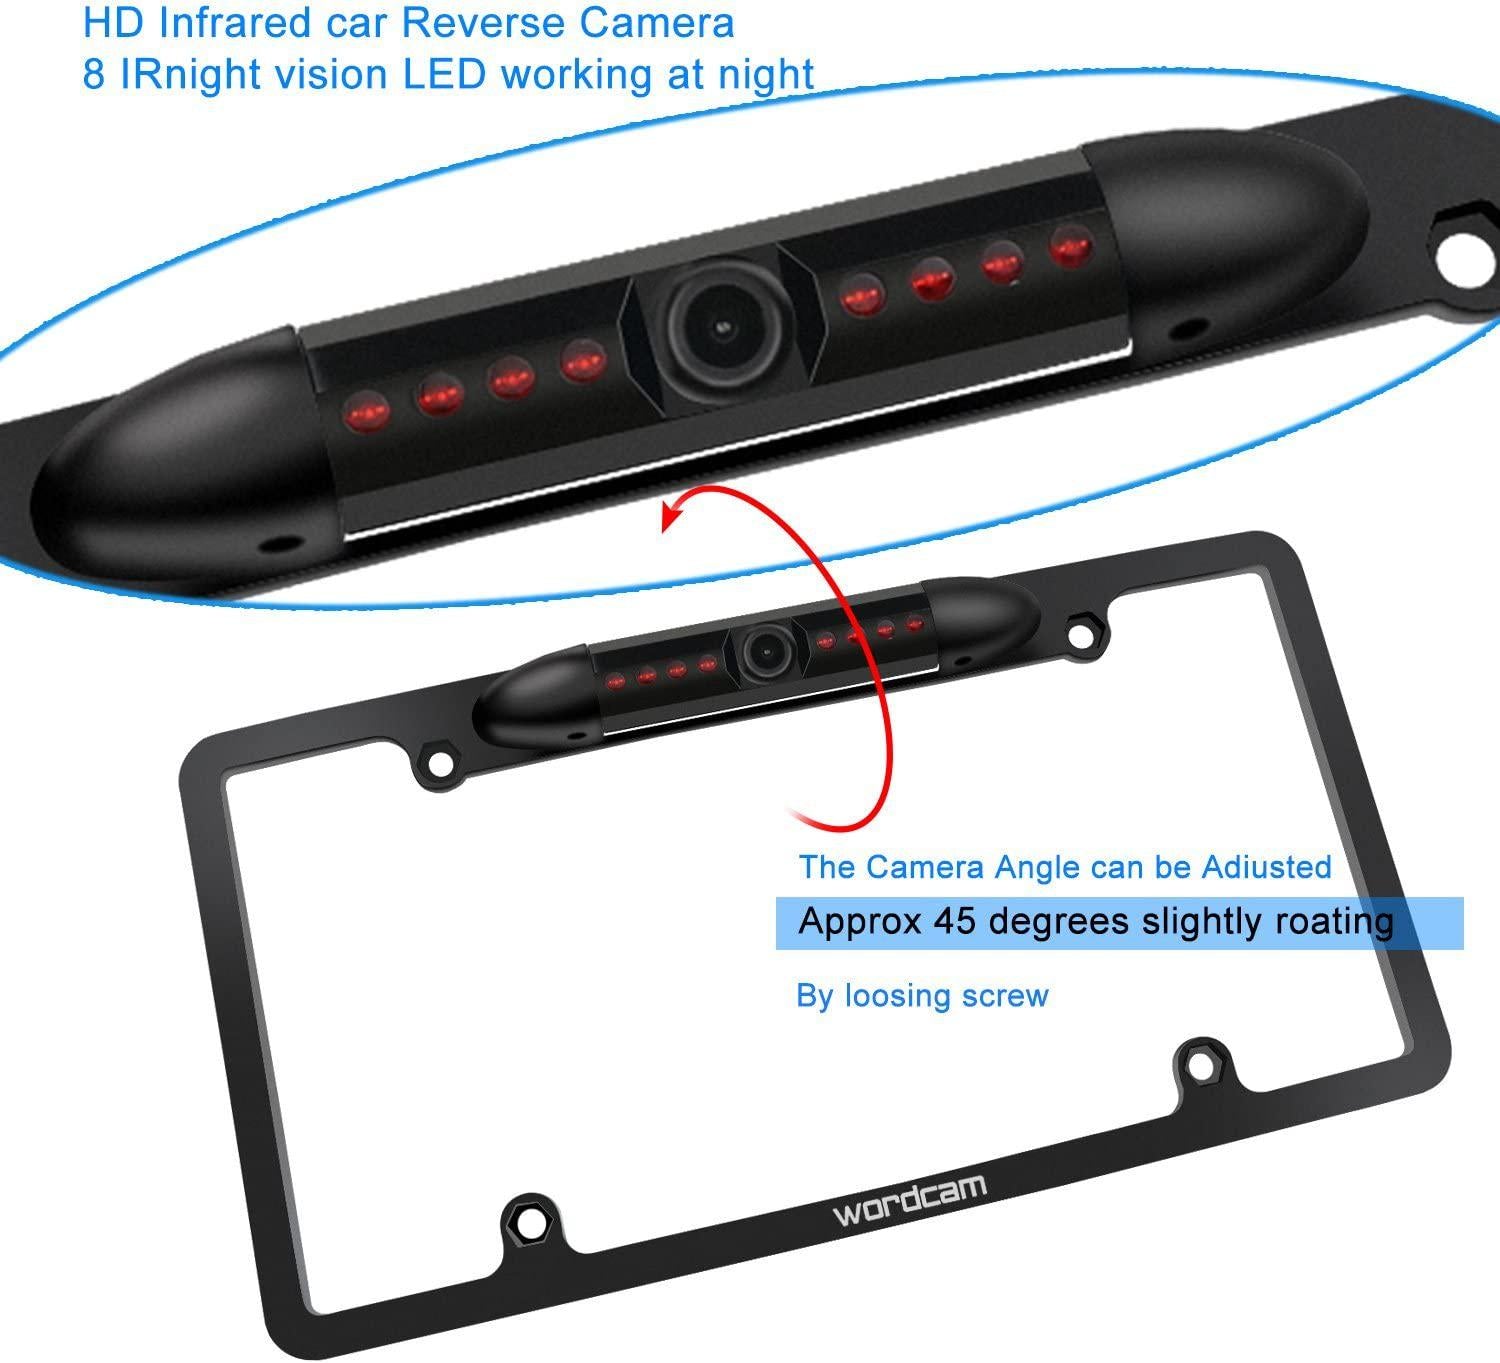 Wordcam, License Plate Frame Rear View Backup Camera 170° Viewing Angle Universal Car License Plate Frame Mount Waterproof High Sensitive 8 IR LED Night Vision Reverse Parking Aid System